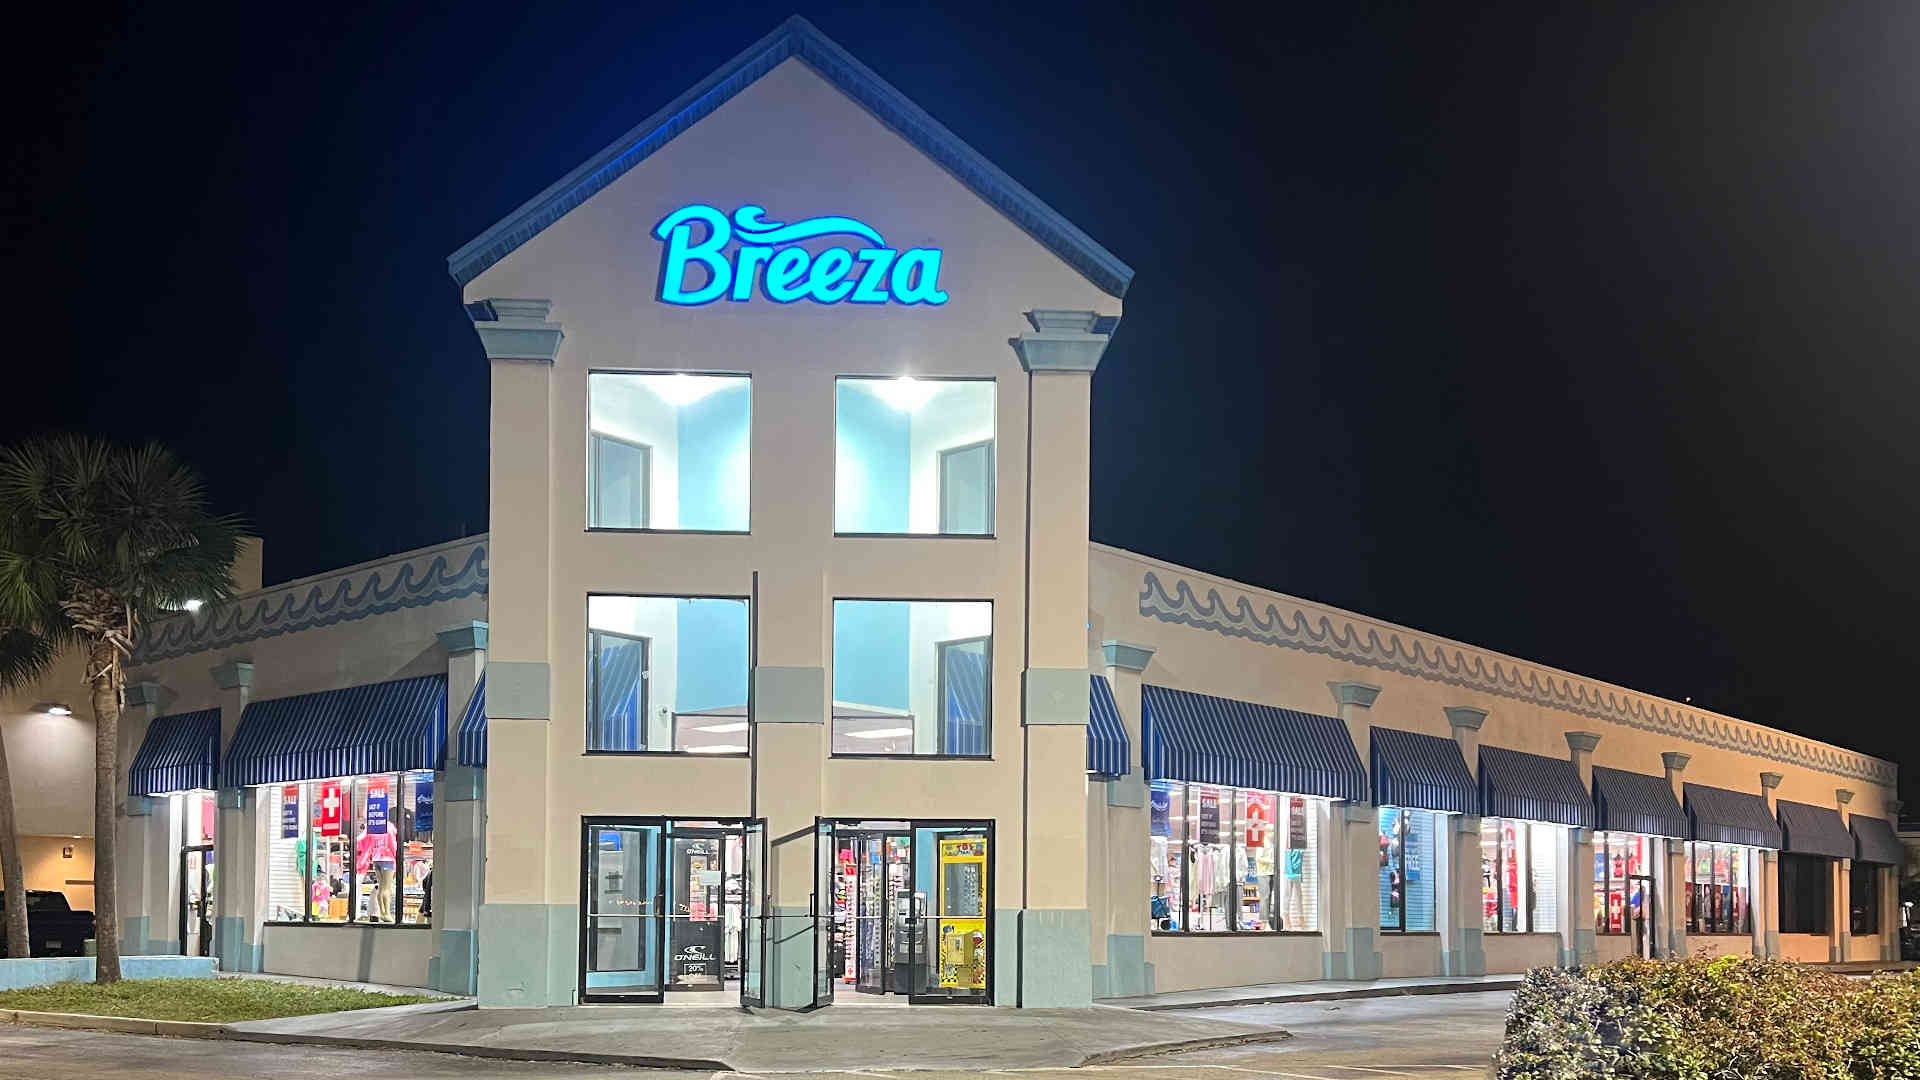 Photo of the Breeza Store Location in Clearwater Beach, FL